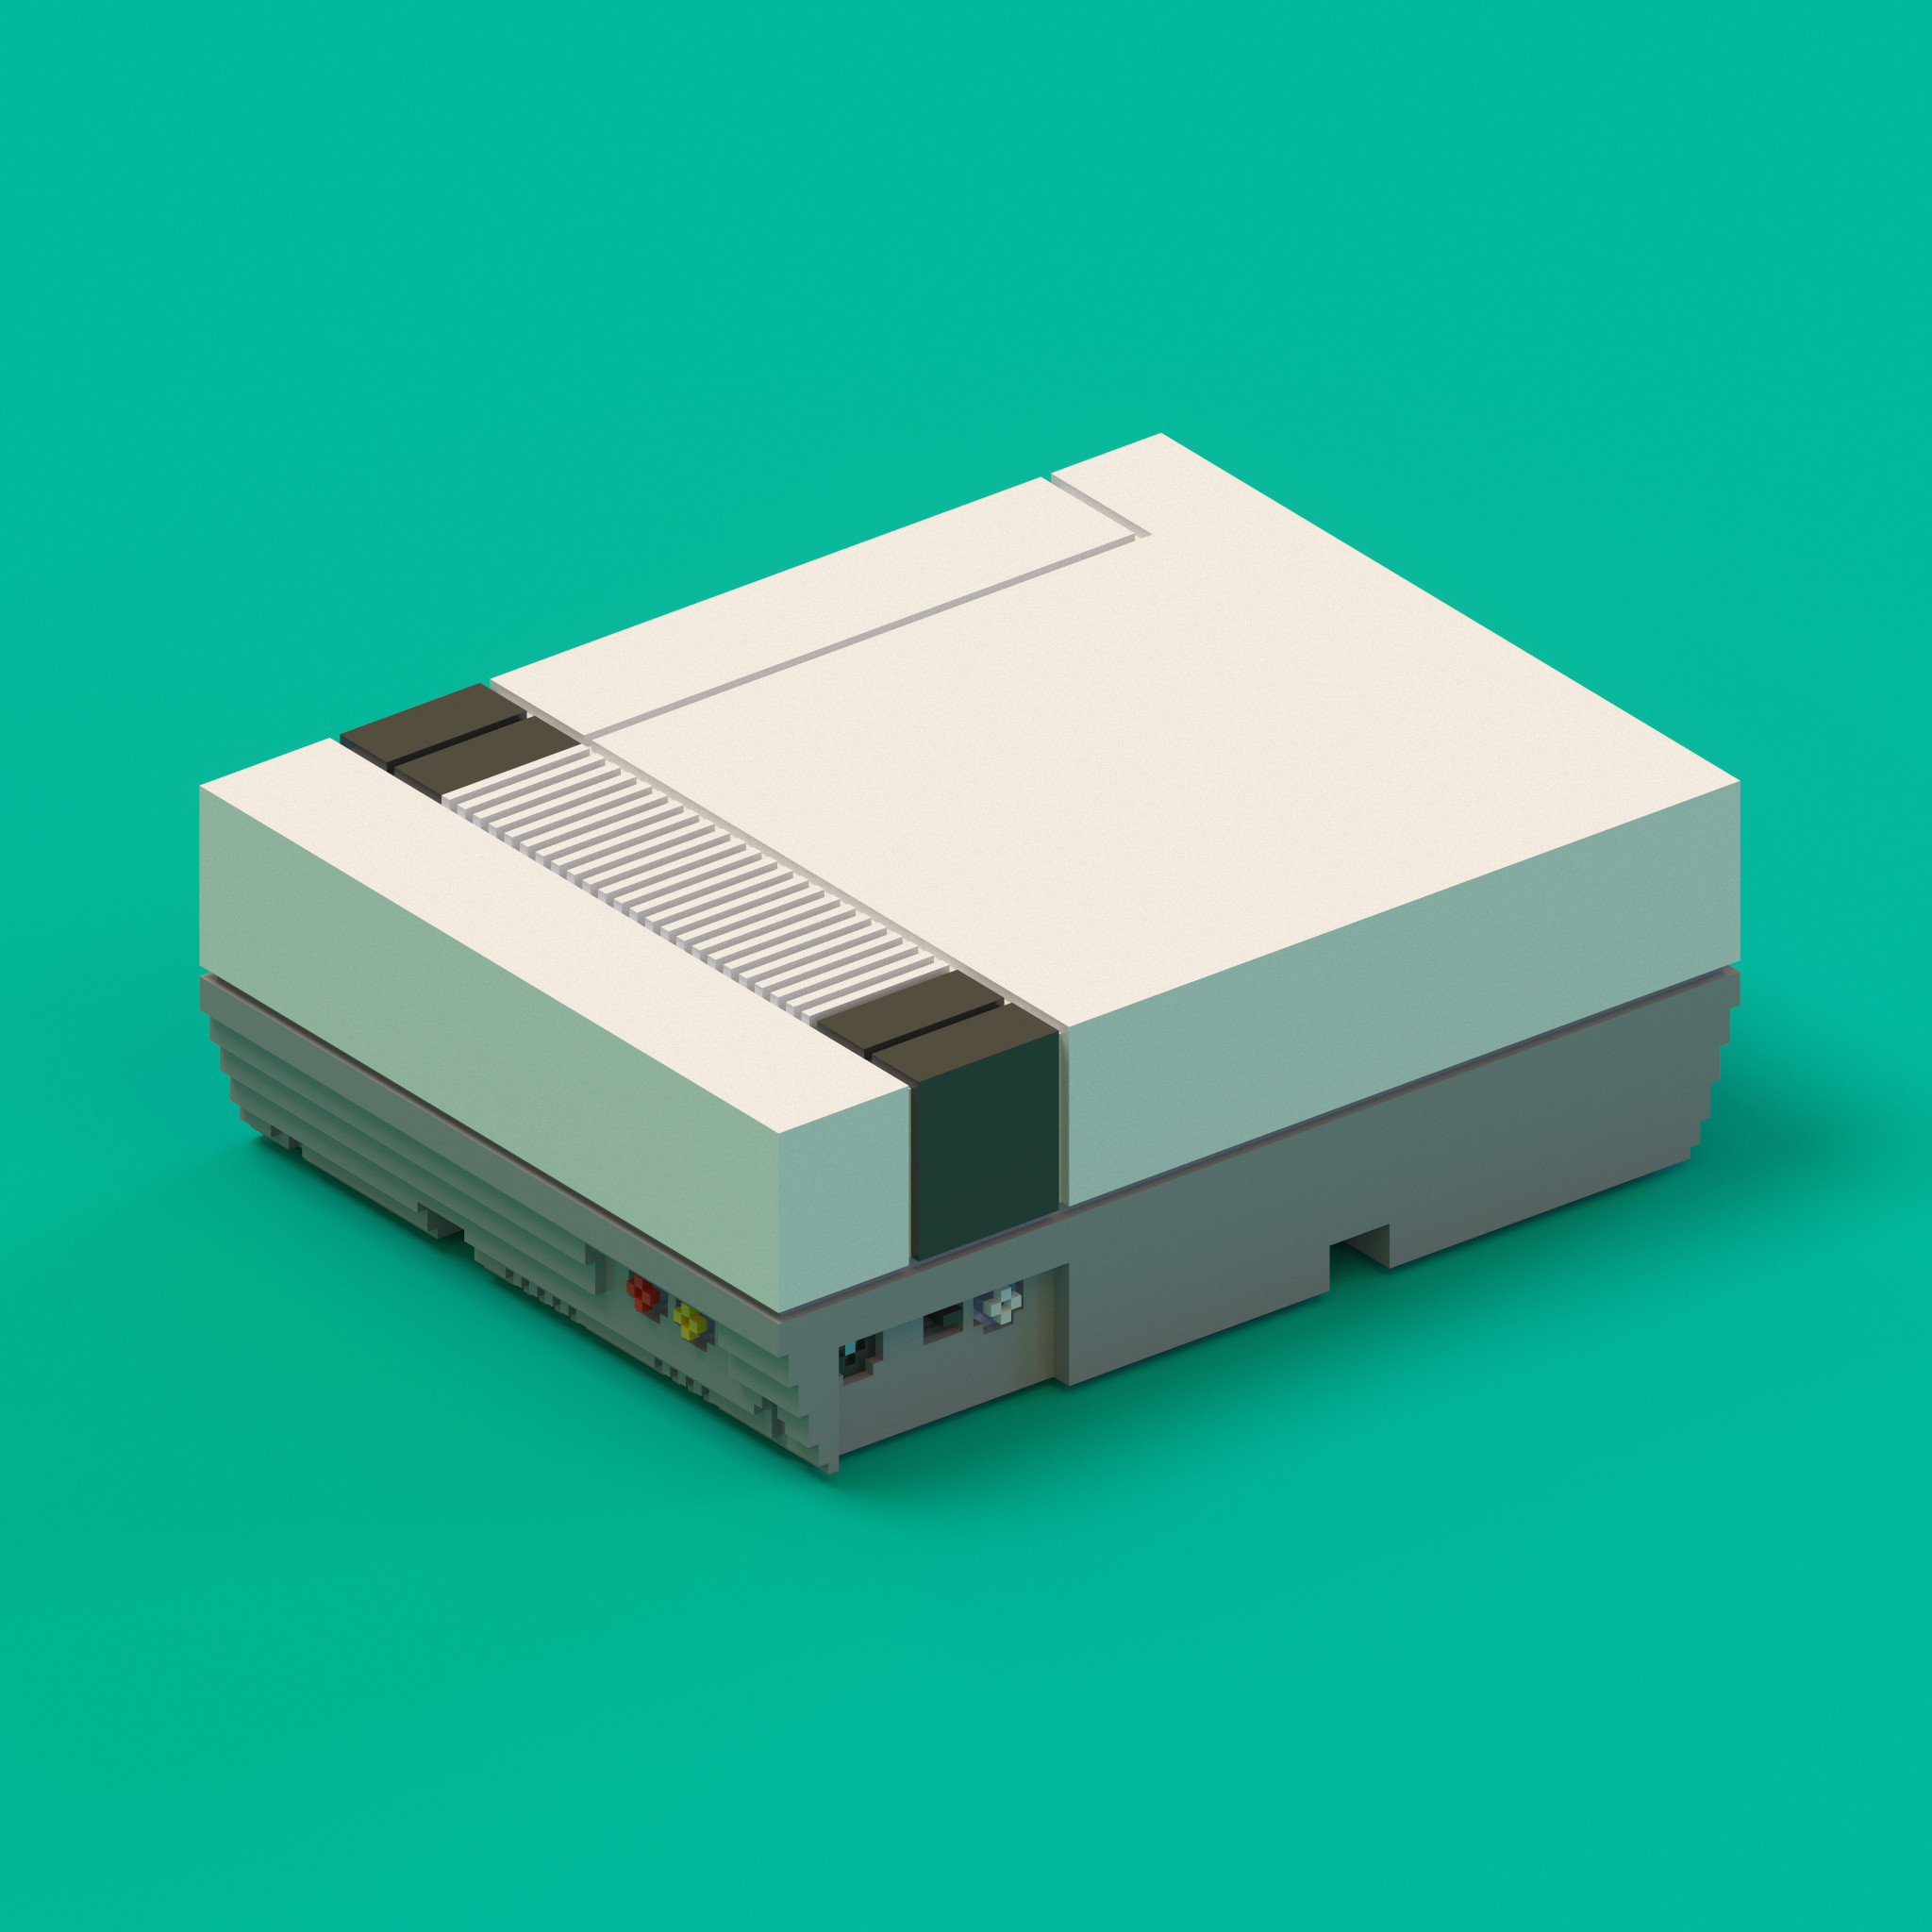 Backside rendering of the Nintendo Entertainment System (NES) videogame console.